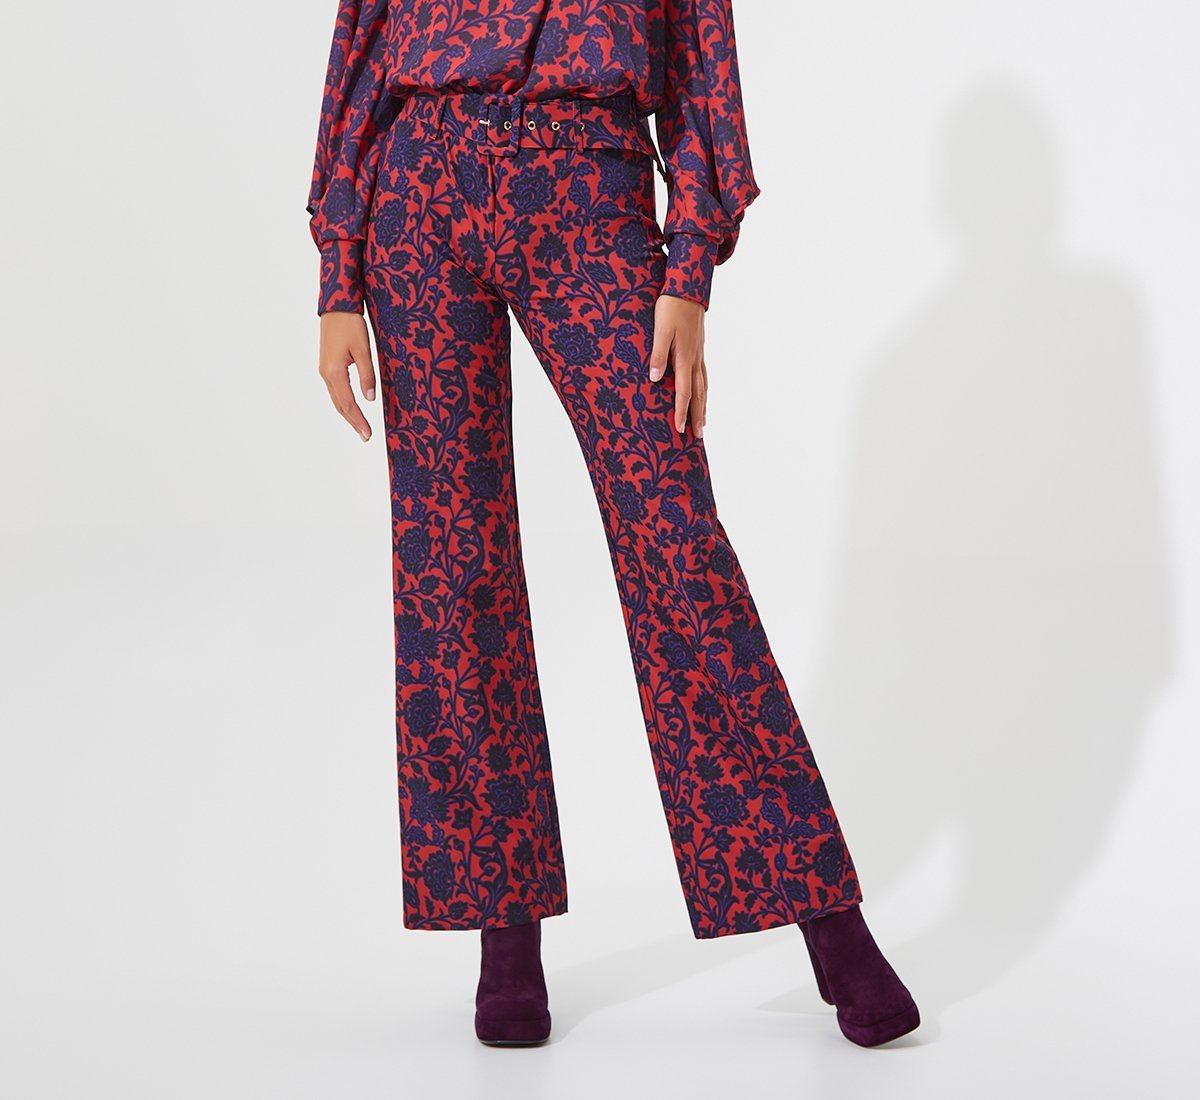 Patterned flared trousers